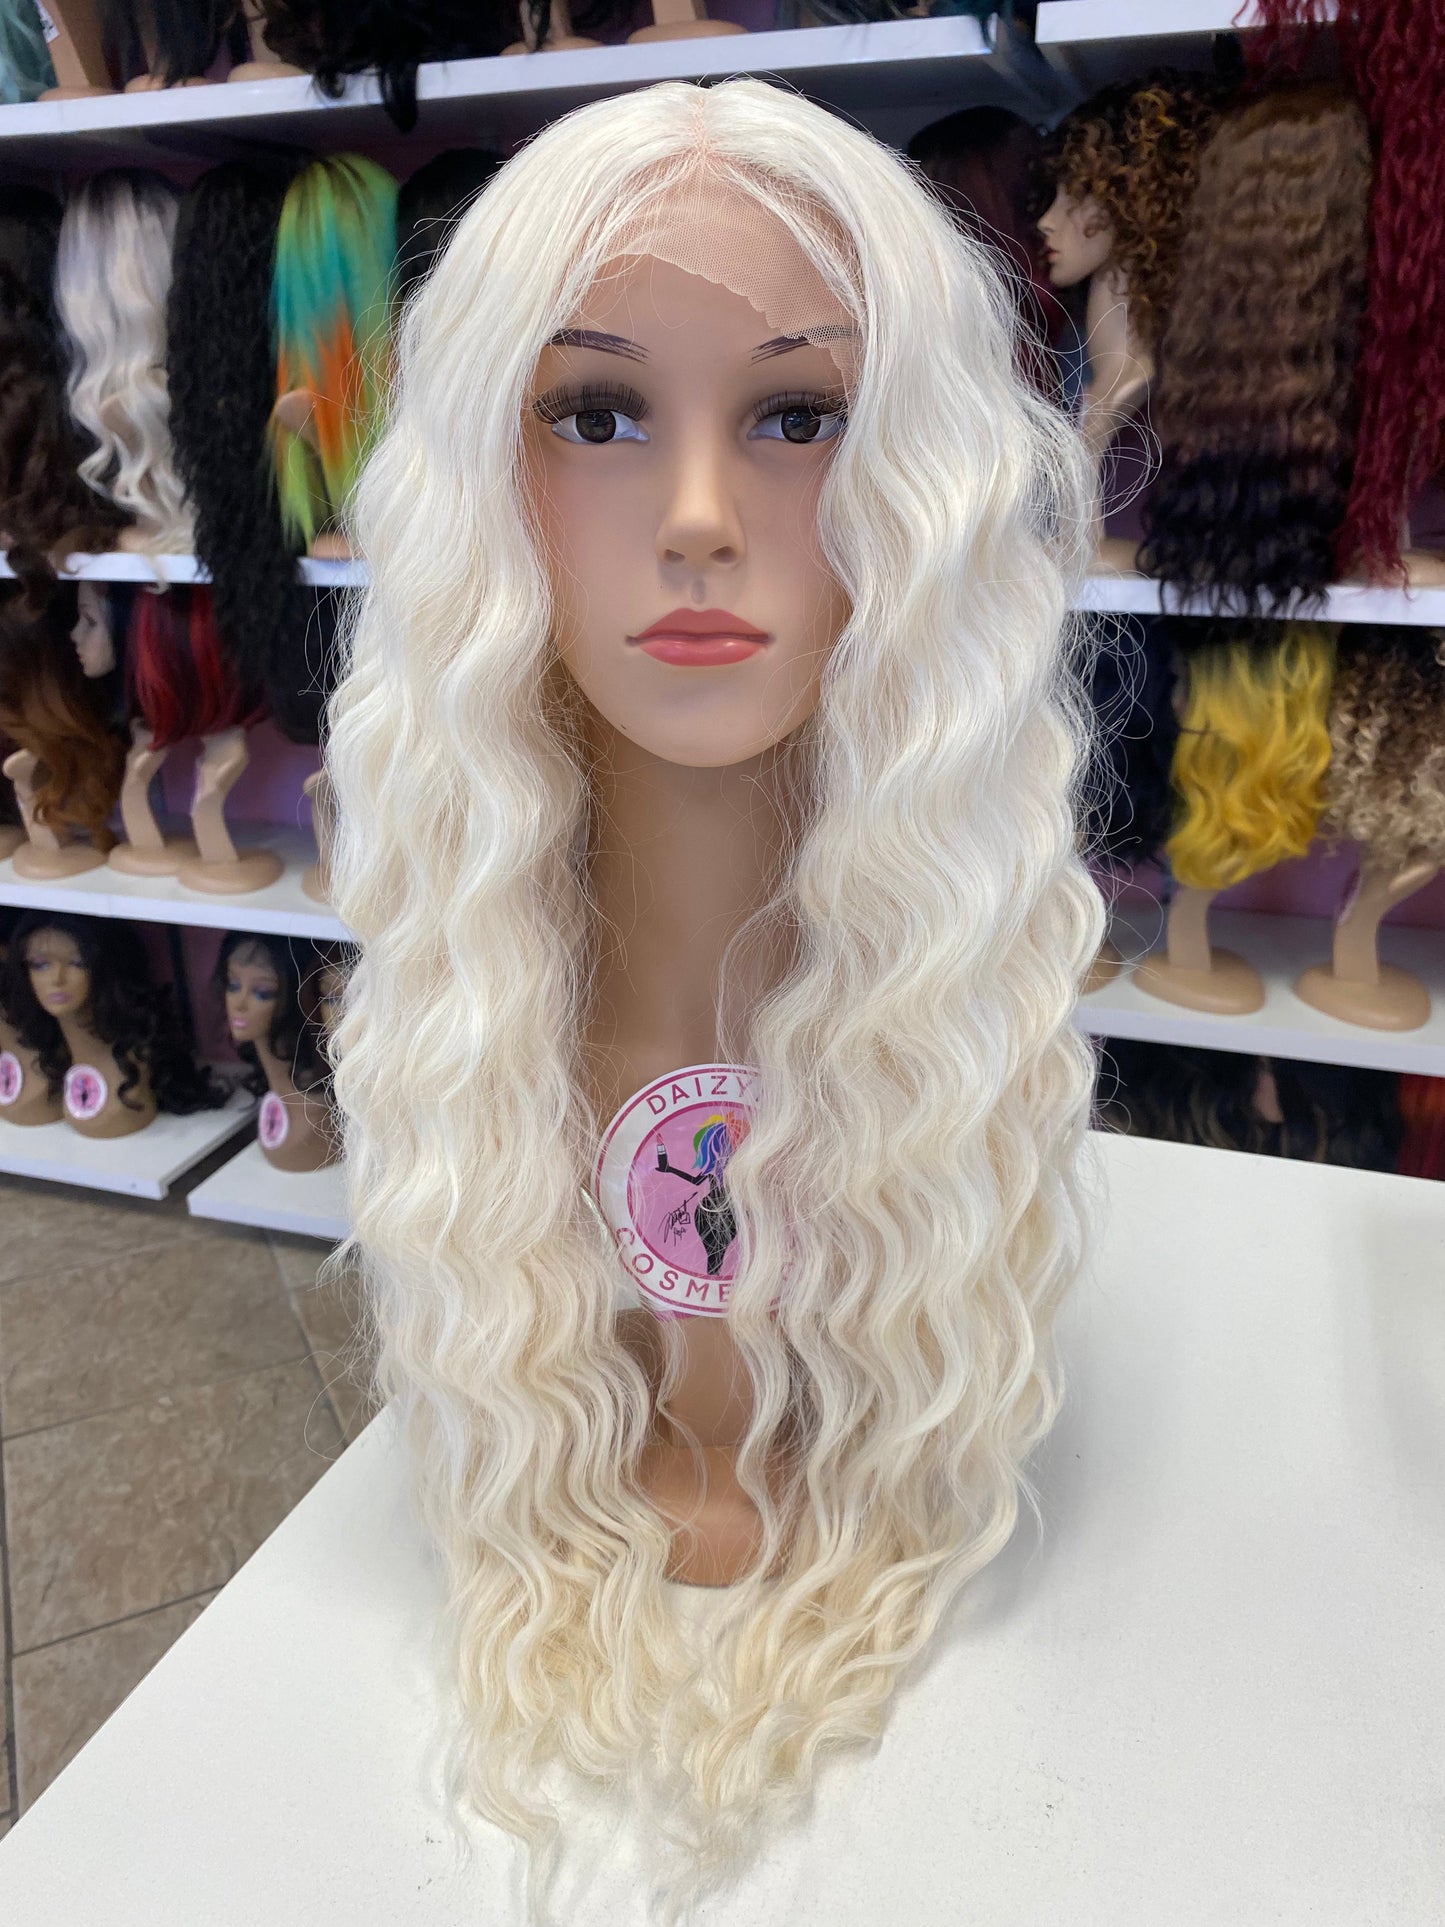 Marina - Deep Middle Part Lace Front Wig - 613B - DaizyKat Cosmetics Marina - Deep Middle Part Lace Front Wig - 613B DaizyKat Cosmetics Wigs